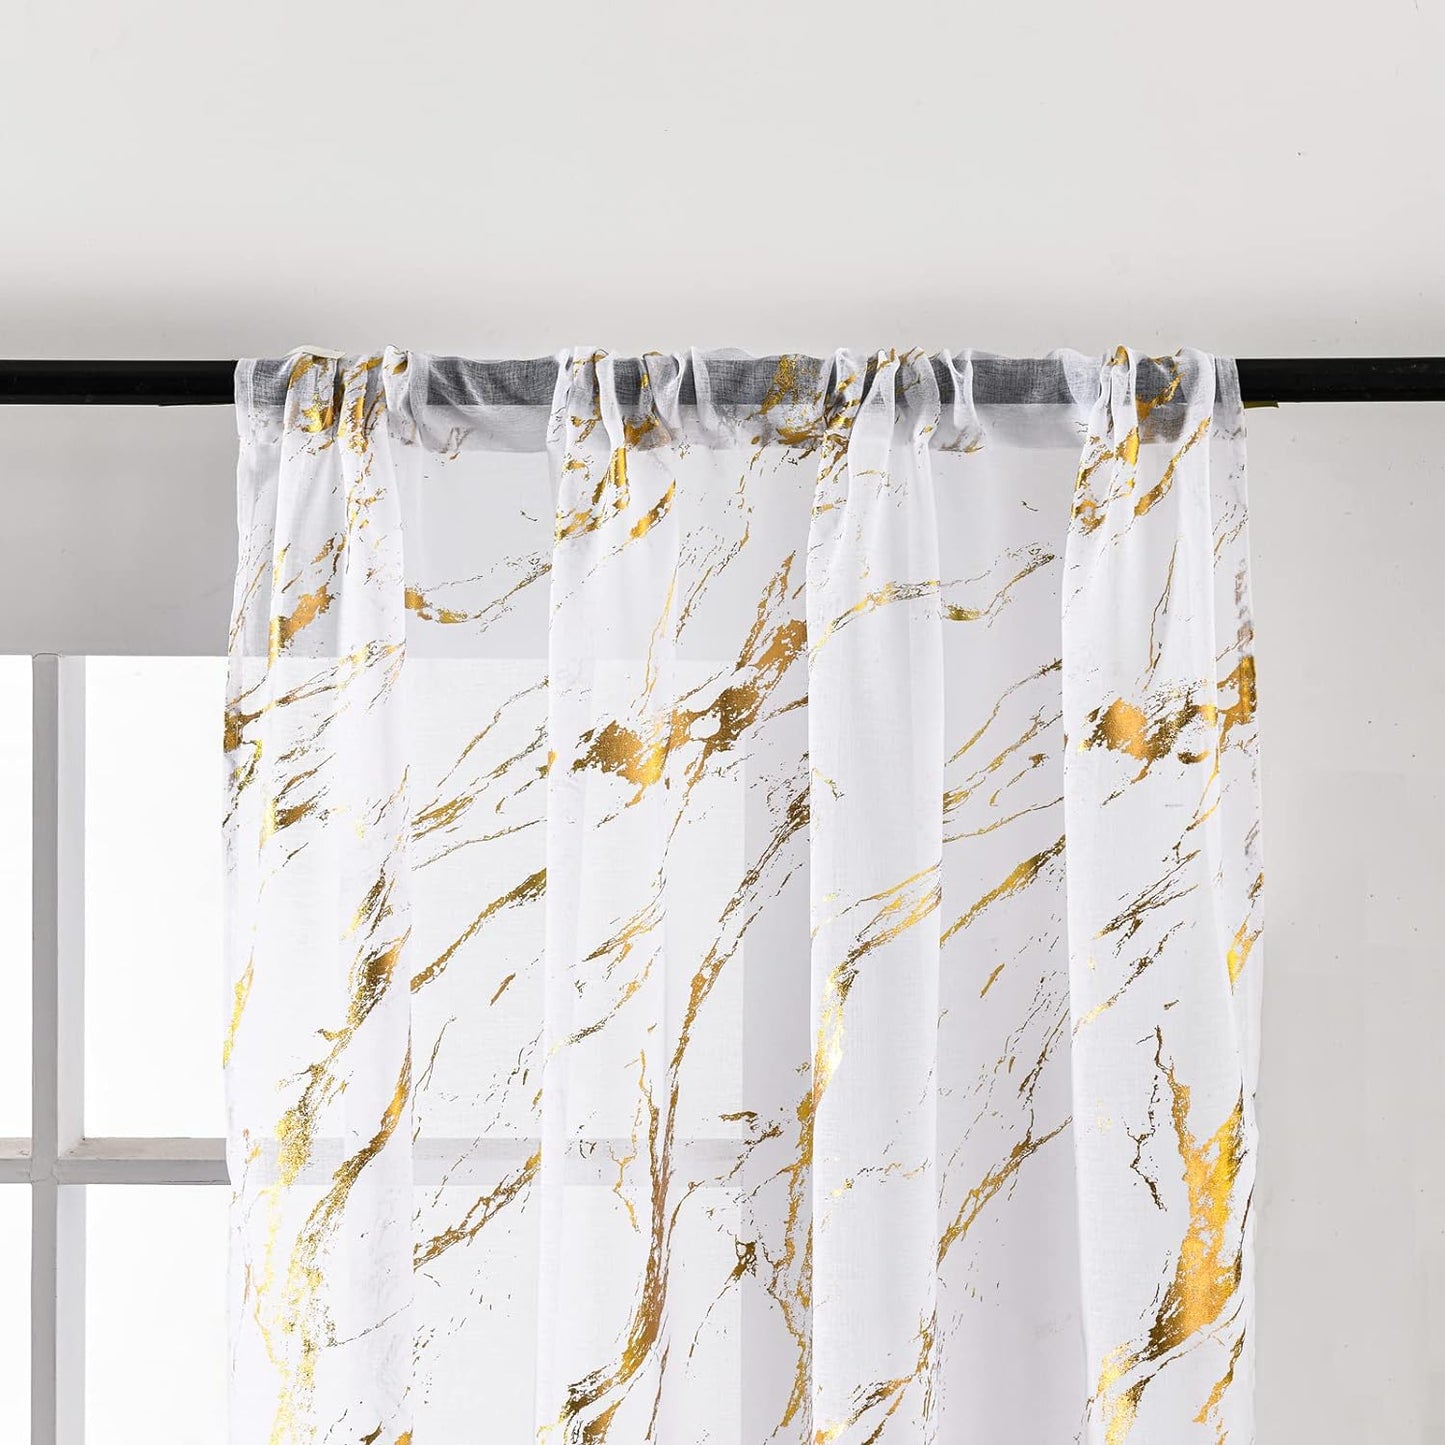 Sutuo Home Marble White Sheer Curtains 84 Inch Length, Gold Foil Print Metallic Bronzing, Privacy Window Treatment Decor Abstract Drape Pair 2 Panels Set for Bedroom Kitchen Living Room 52" W X 84" L  Sutuo Home   